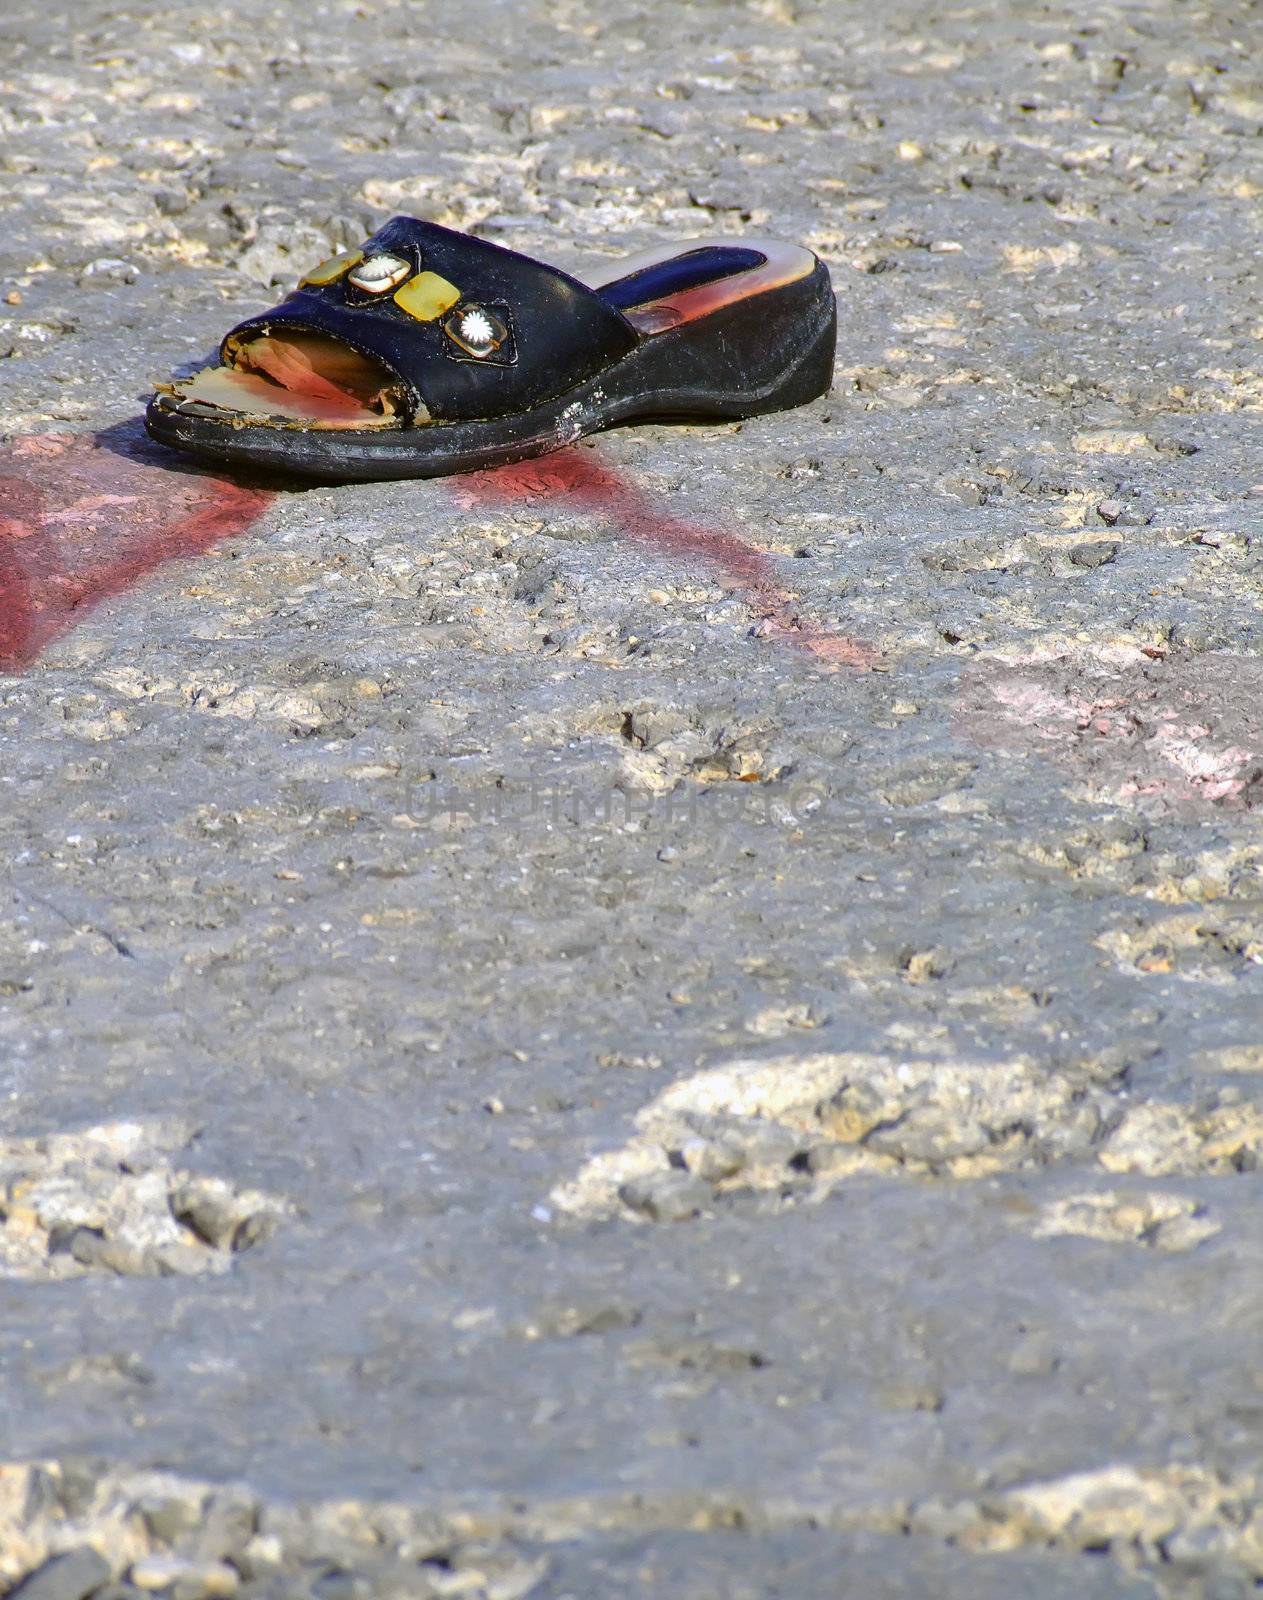 Lone battered shoe belonging to a warzone victim